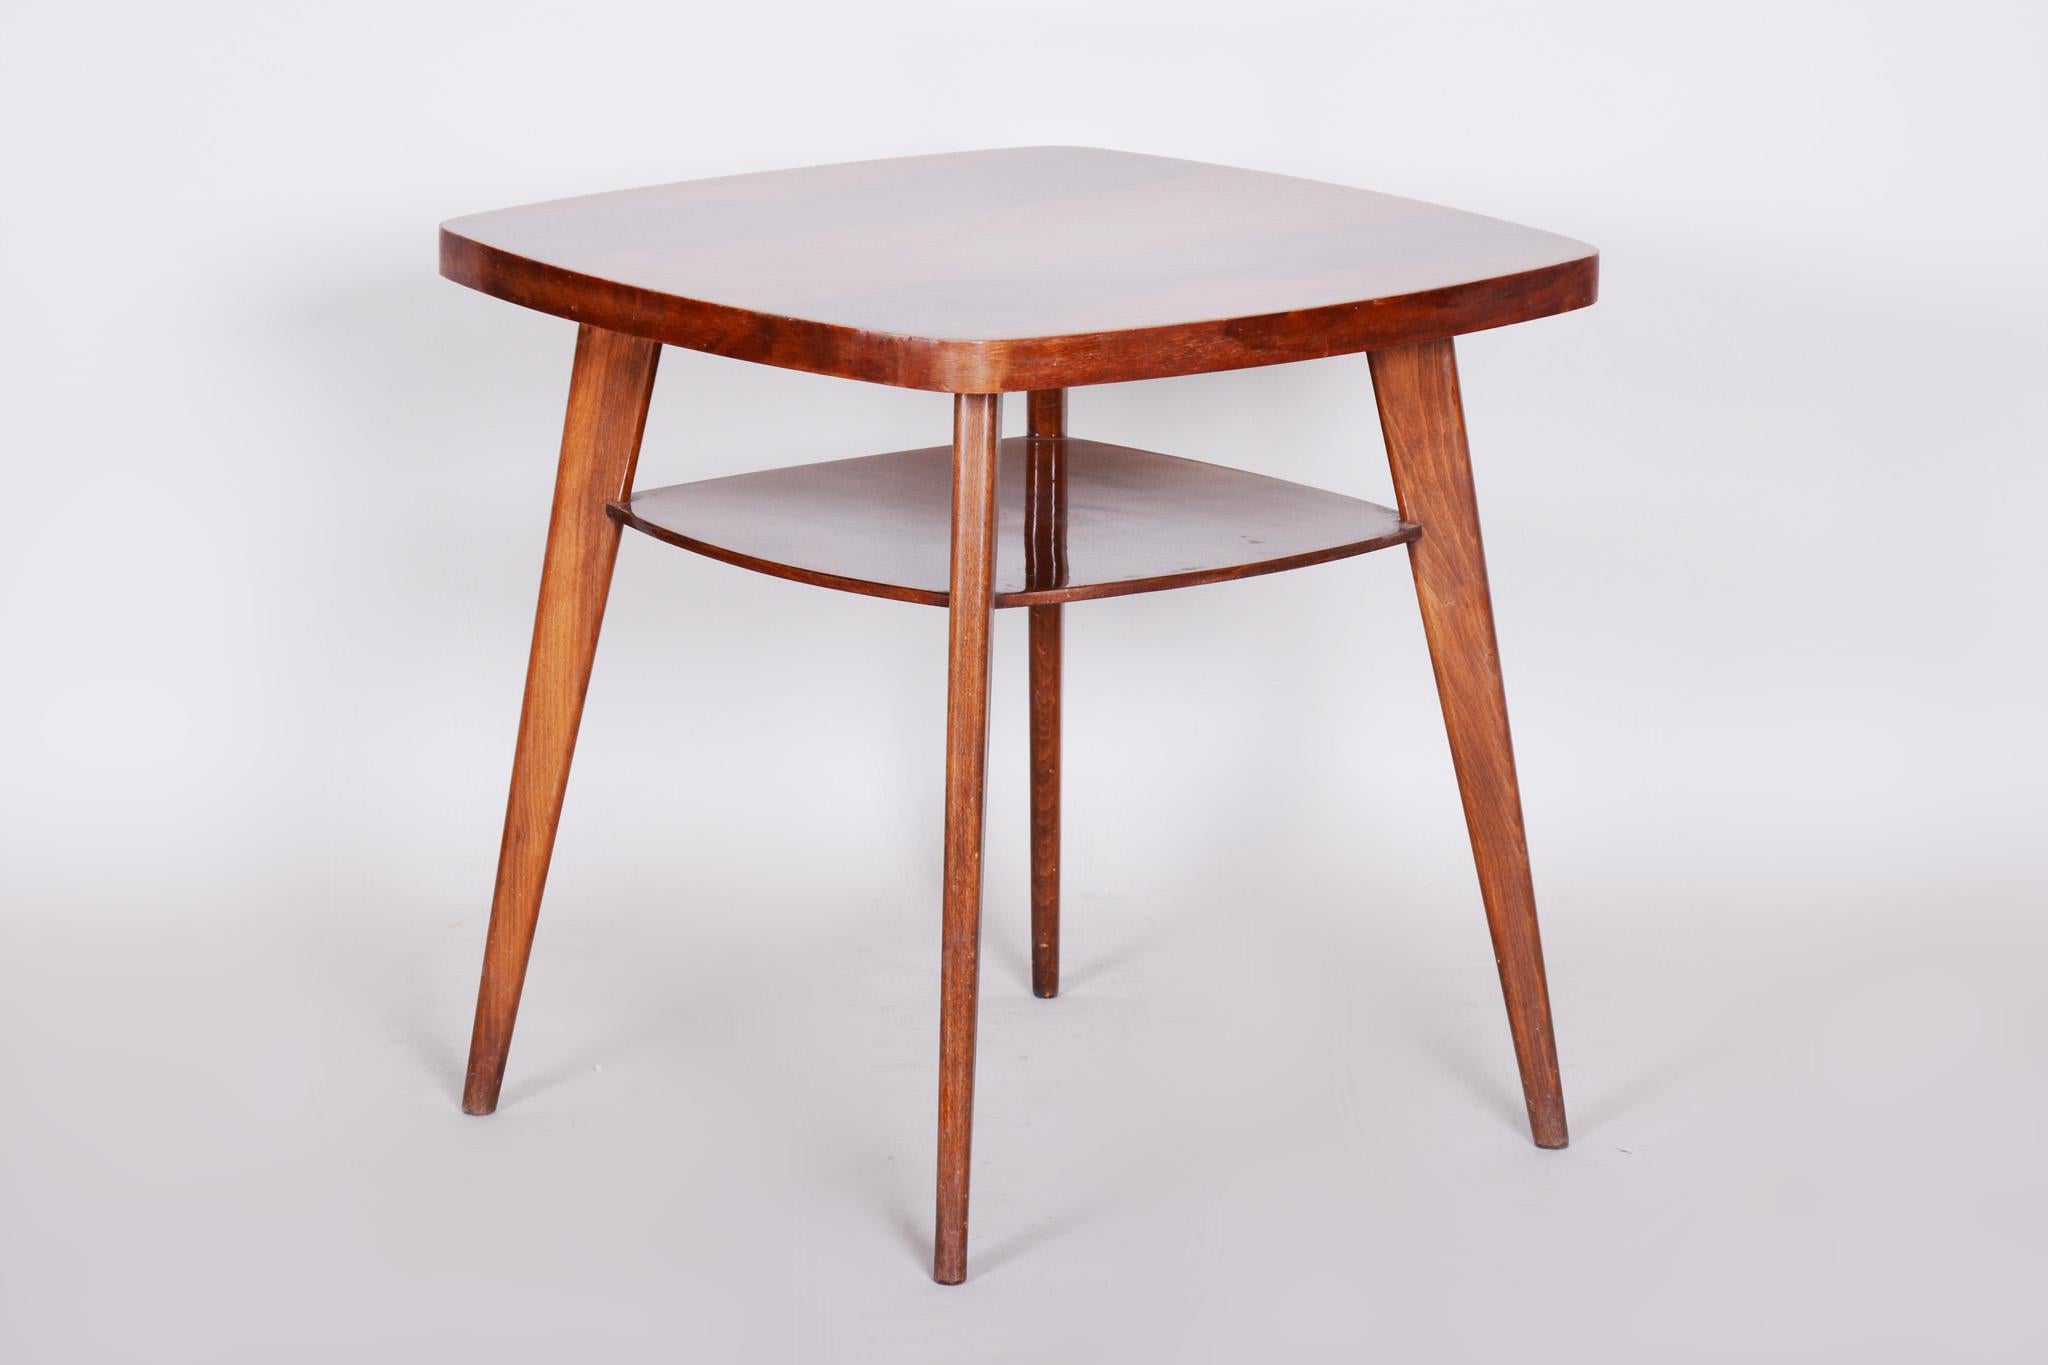 Walnut Table, Czech Midcentury, Preserved Original Condition, 1950s In Good Condition For Sale In Horomerice, CZ